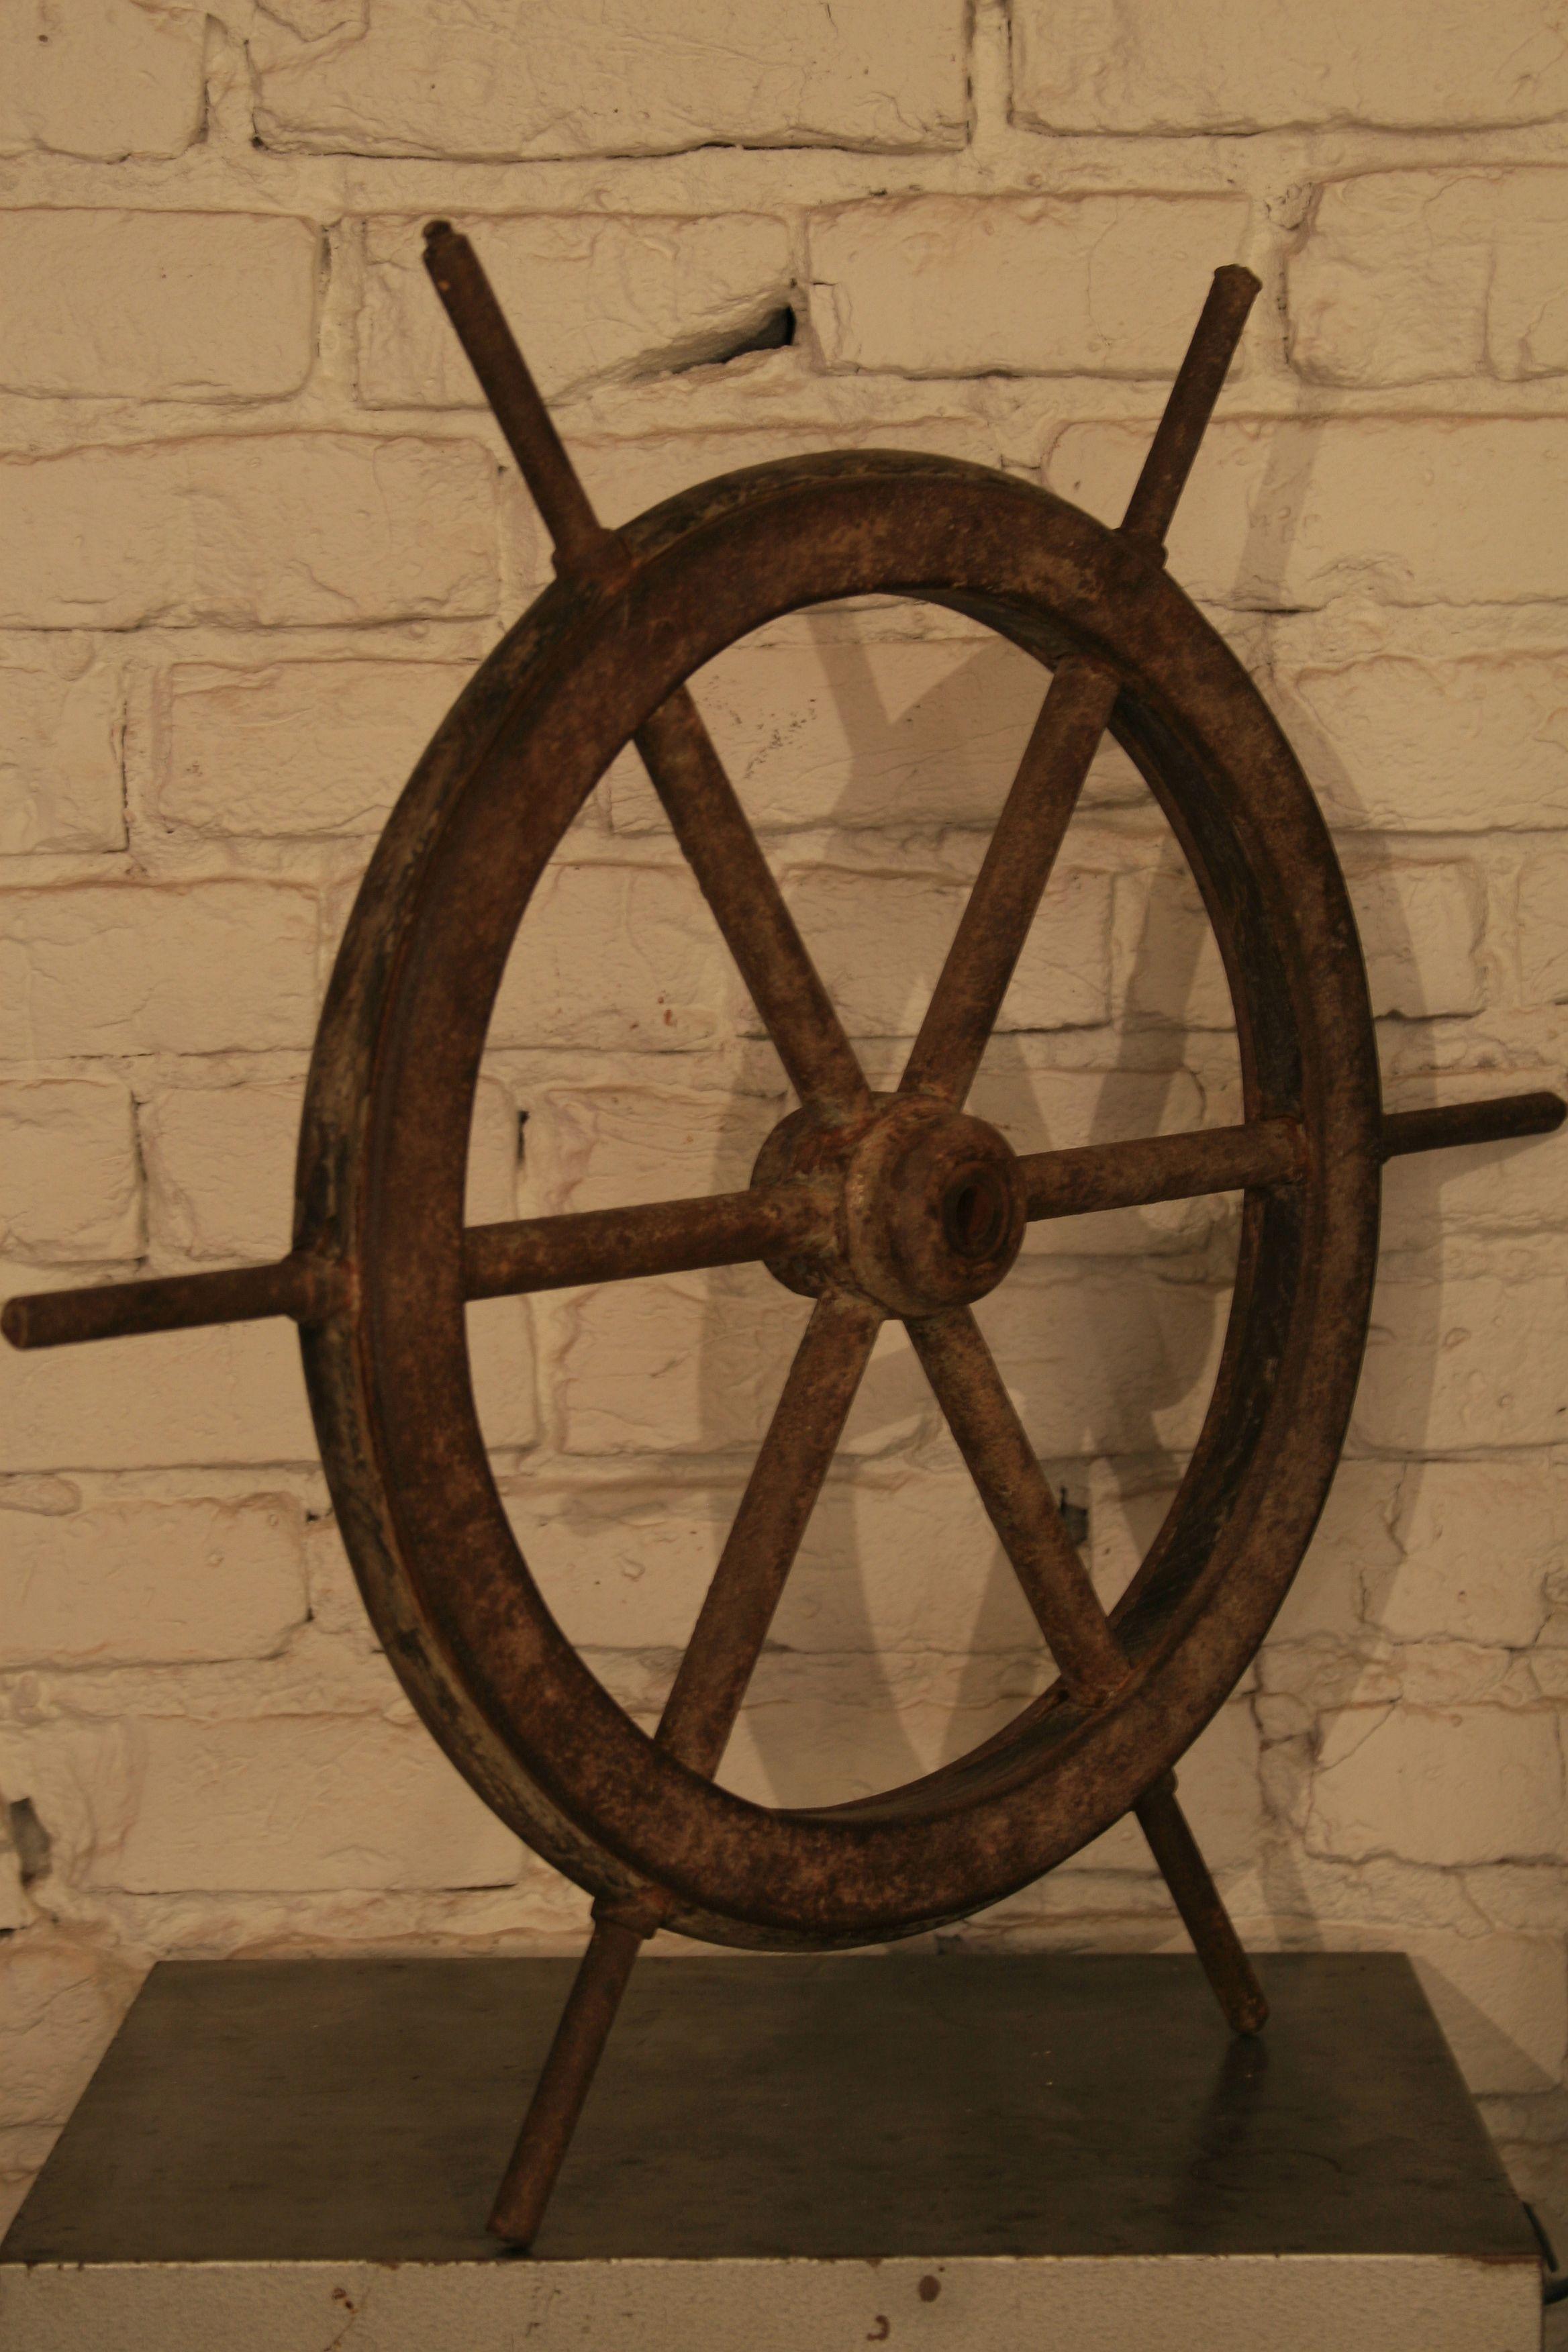 The original antique steering wheel from a fishing boat or a ship.
Steel structure, profiled wood inside the wheel frame, rims screwed with bolts. Preserved remains of the original paint, the whole covered with a beautiful patina of